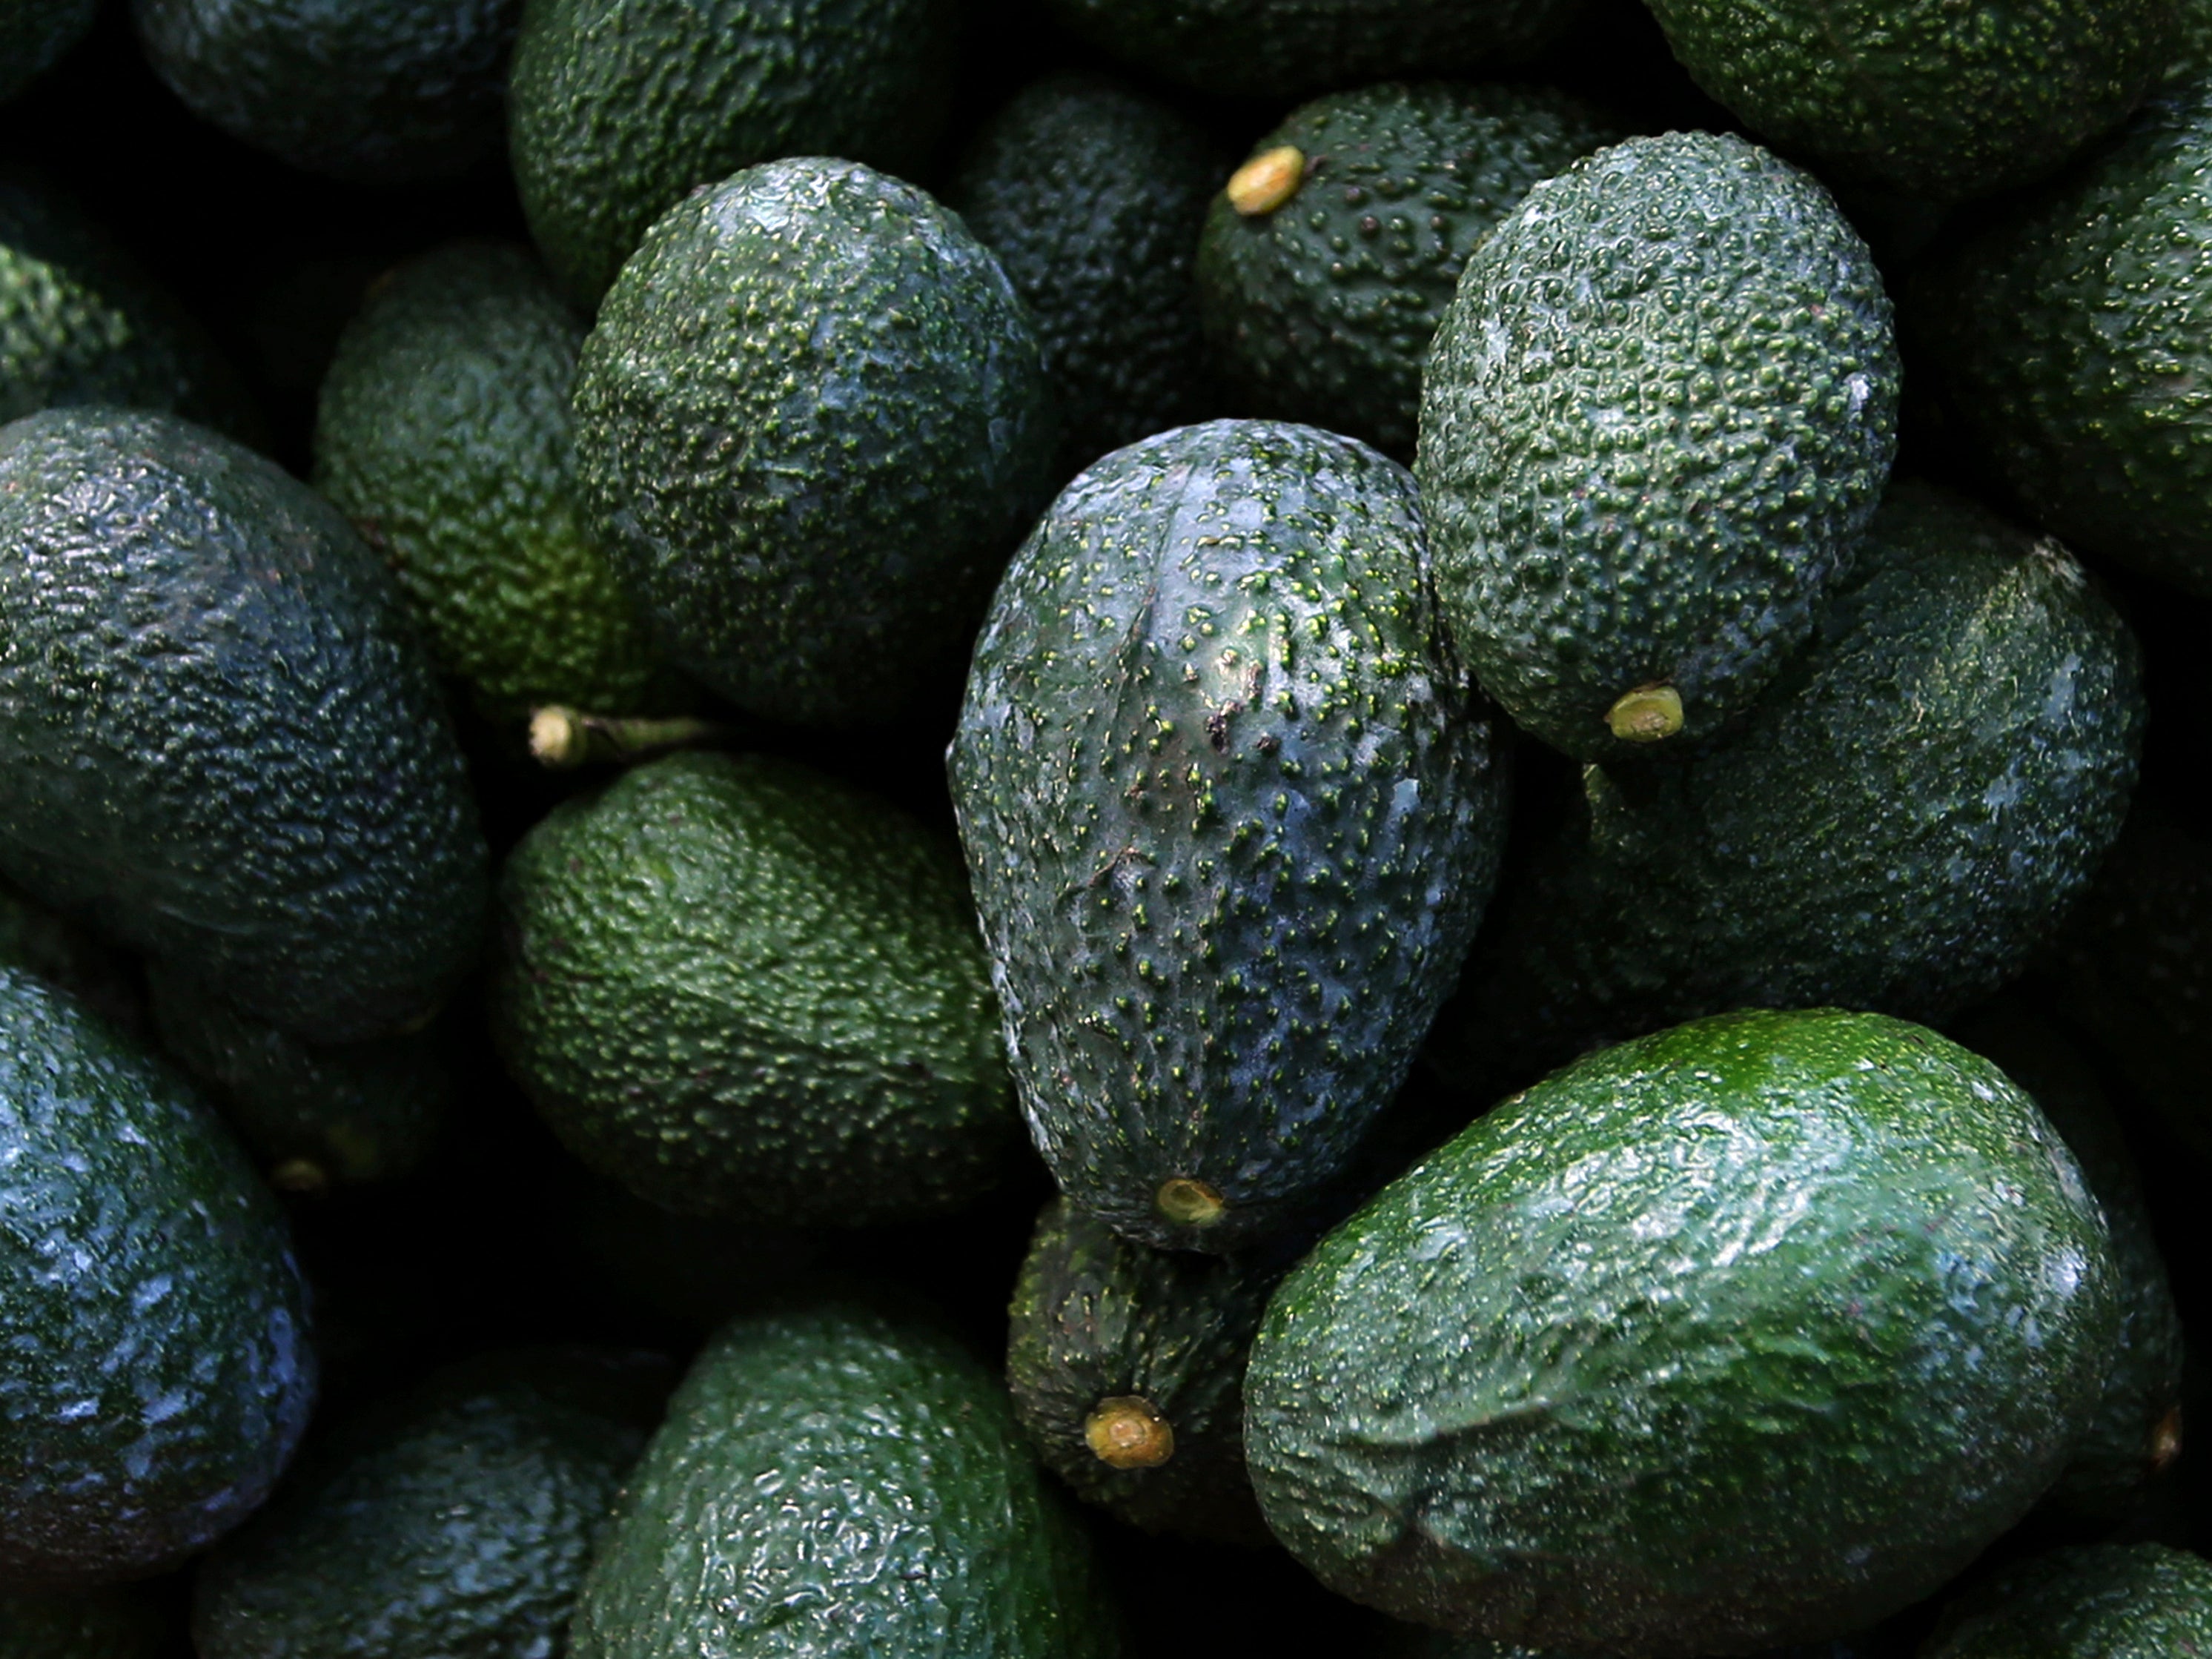 Recently harvested avocados at an orchard in Michoacán state, Mexico, October 2019